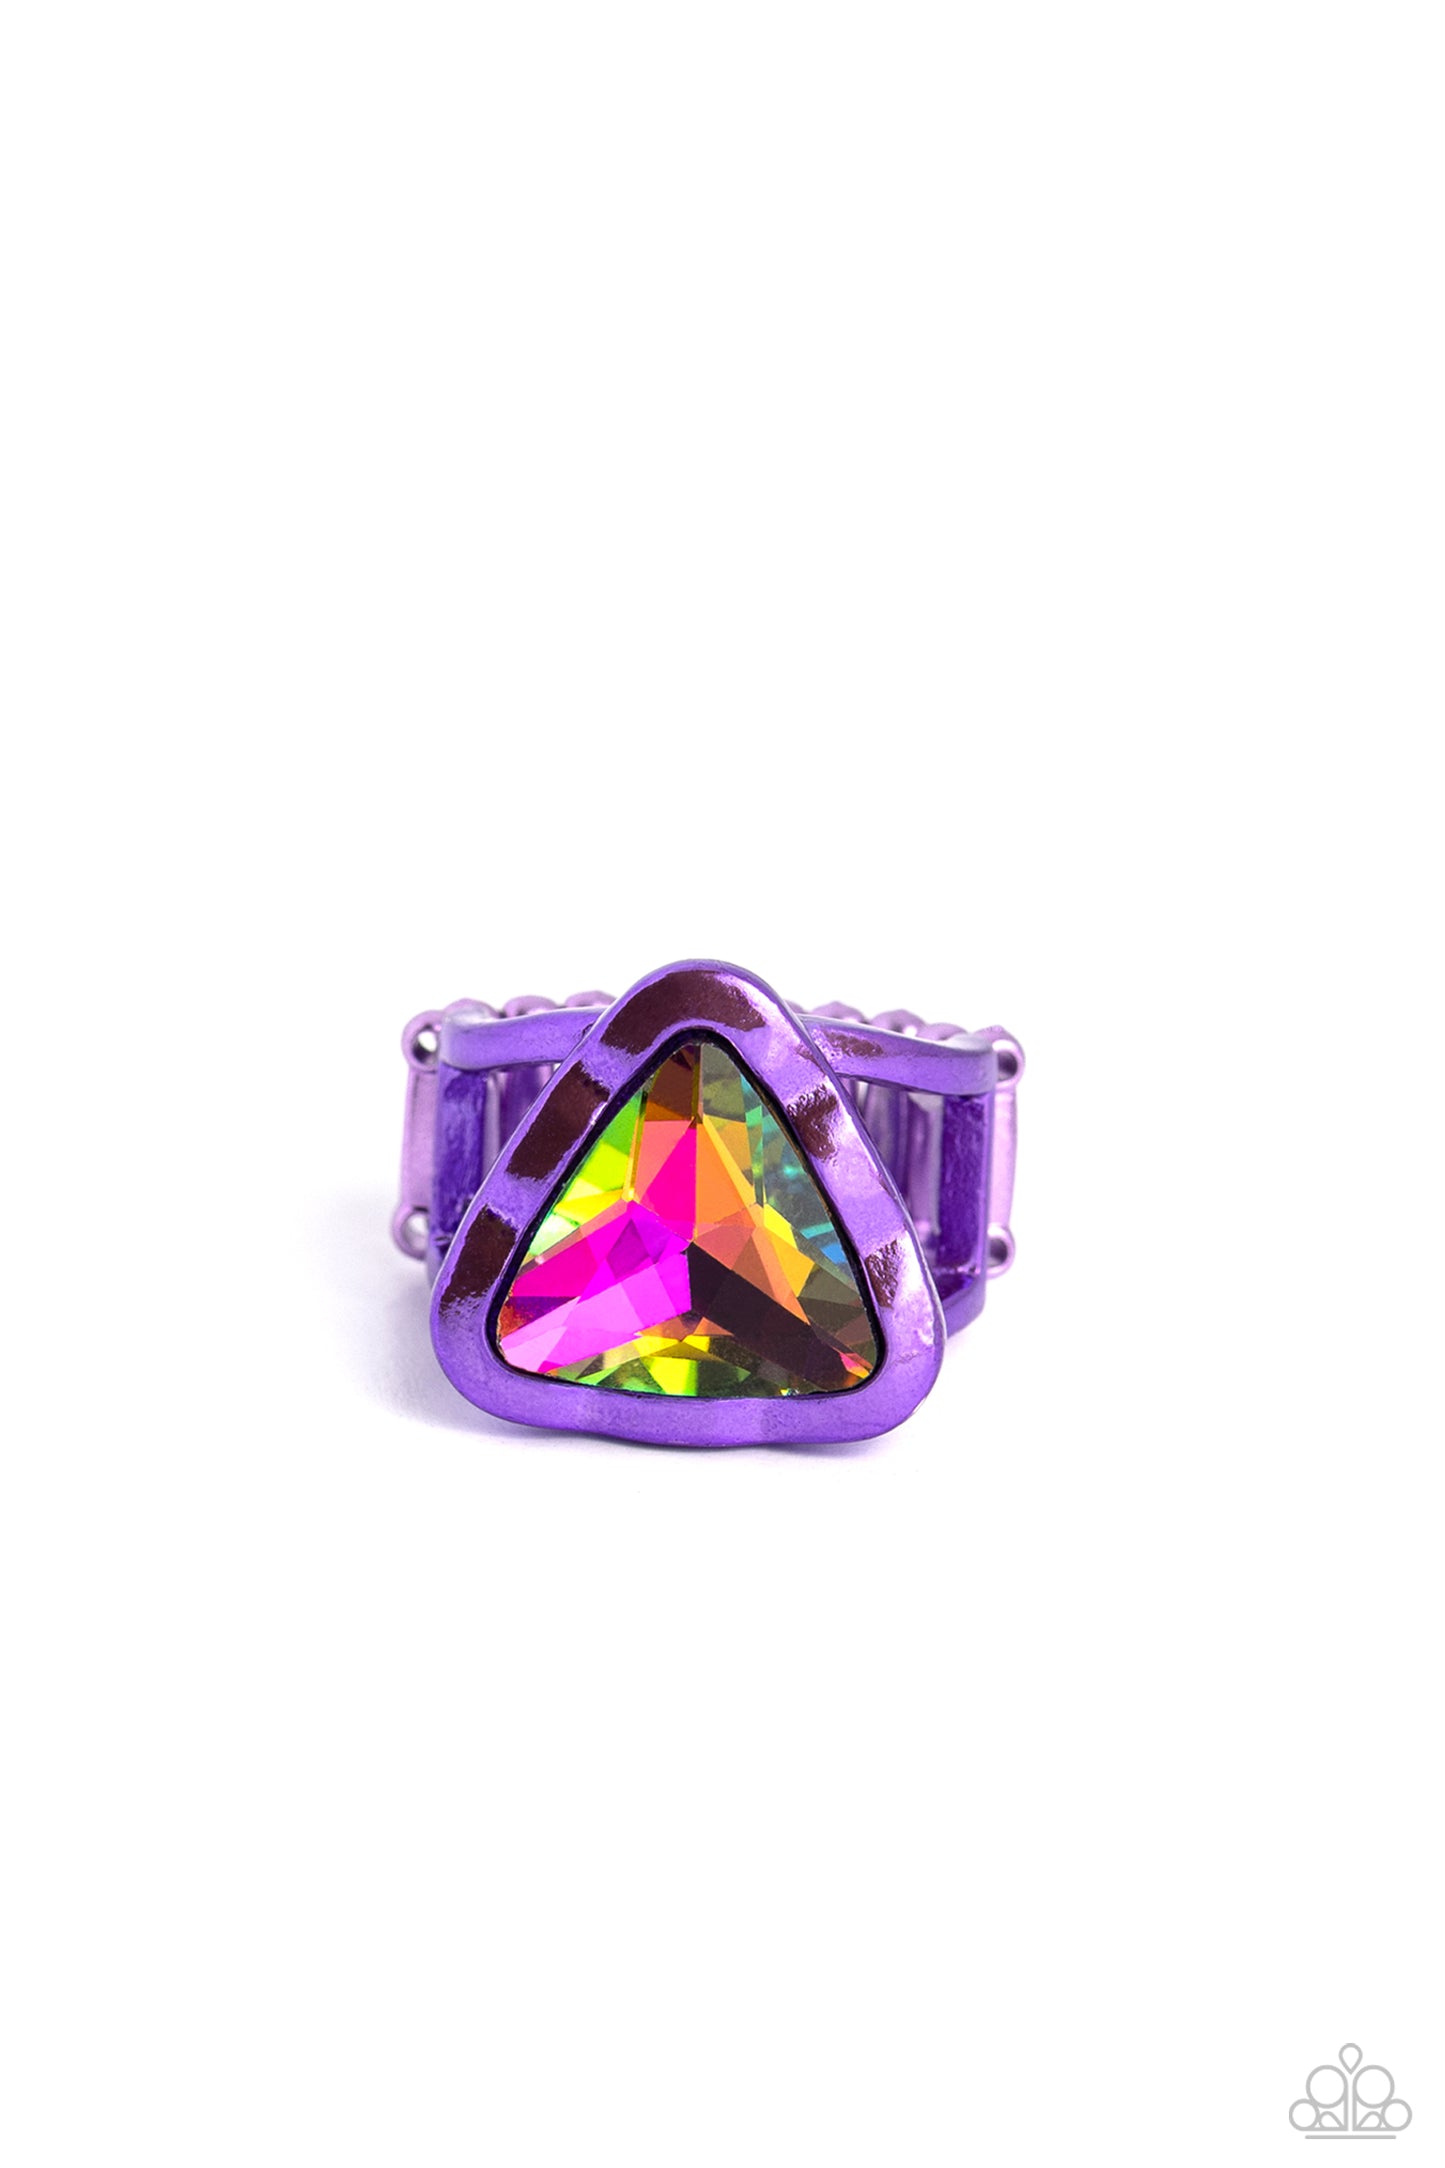 Paparazzi Accessories Triangle Tyrant - Purple Featuring a UV shimmer, a triangle-cut gem is pressed into a scalloped triangular electric purple frame set atop a thin, airy band for a colorfully gritty look. Features a stretchy band for a flexible fit. So